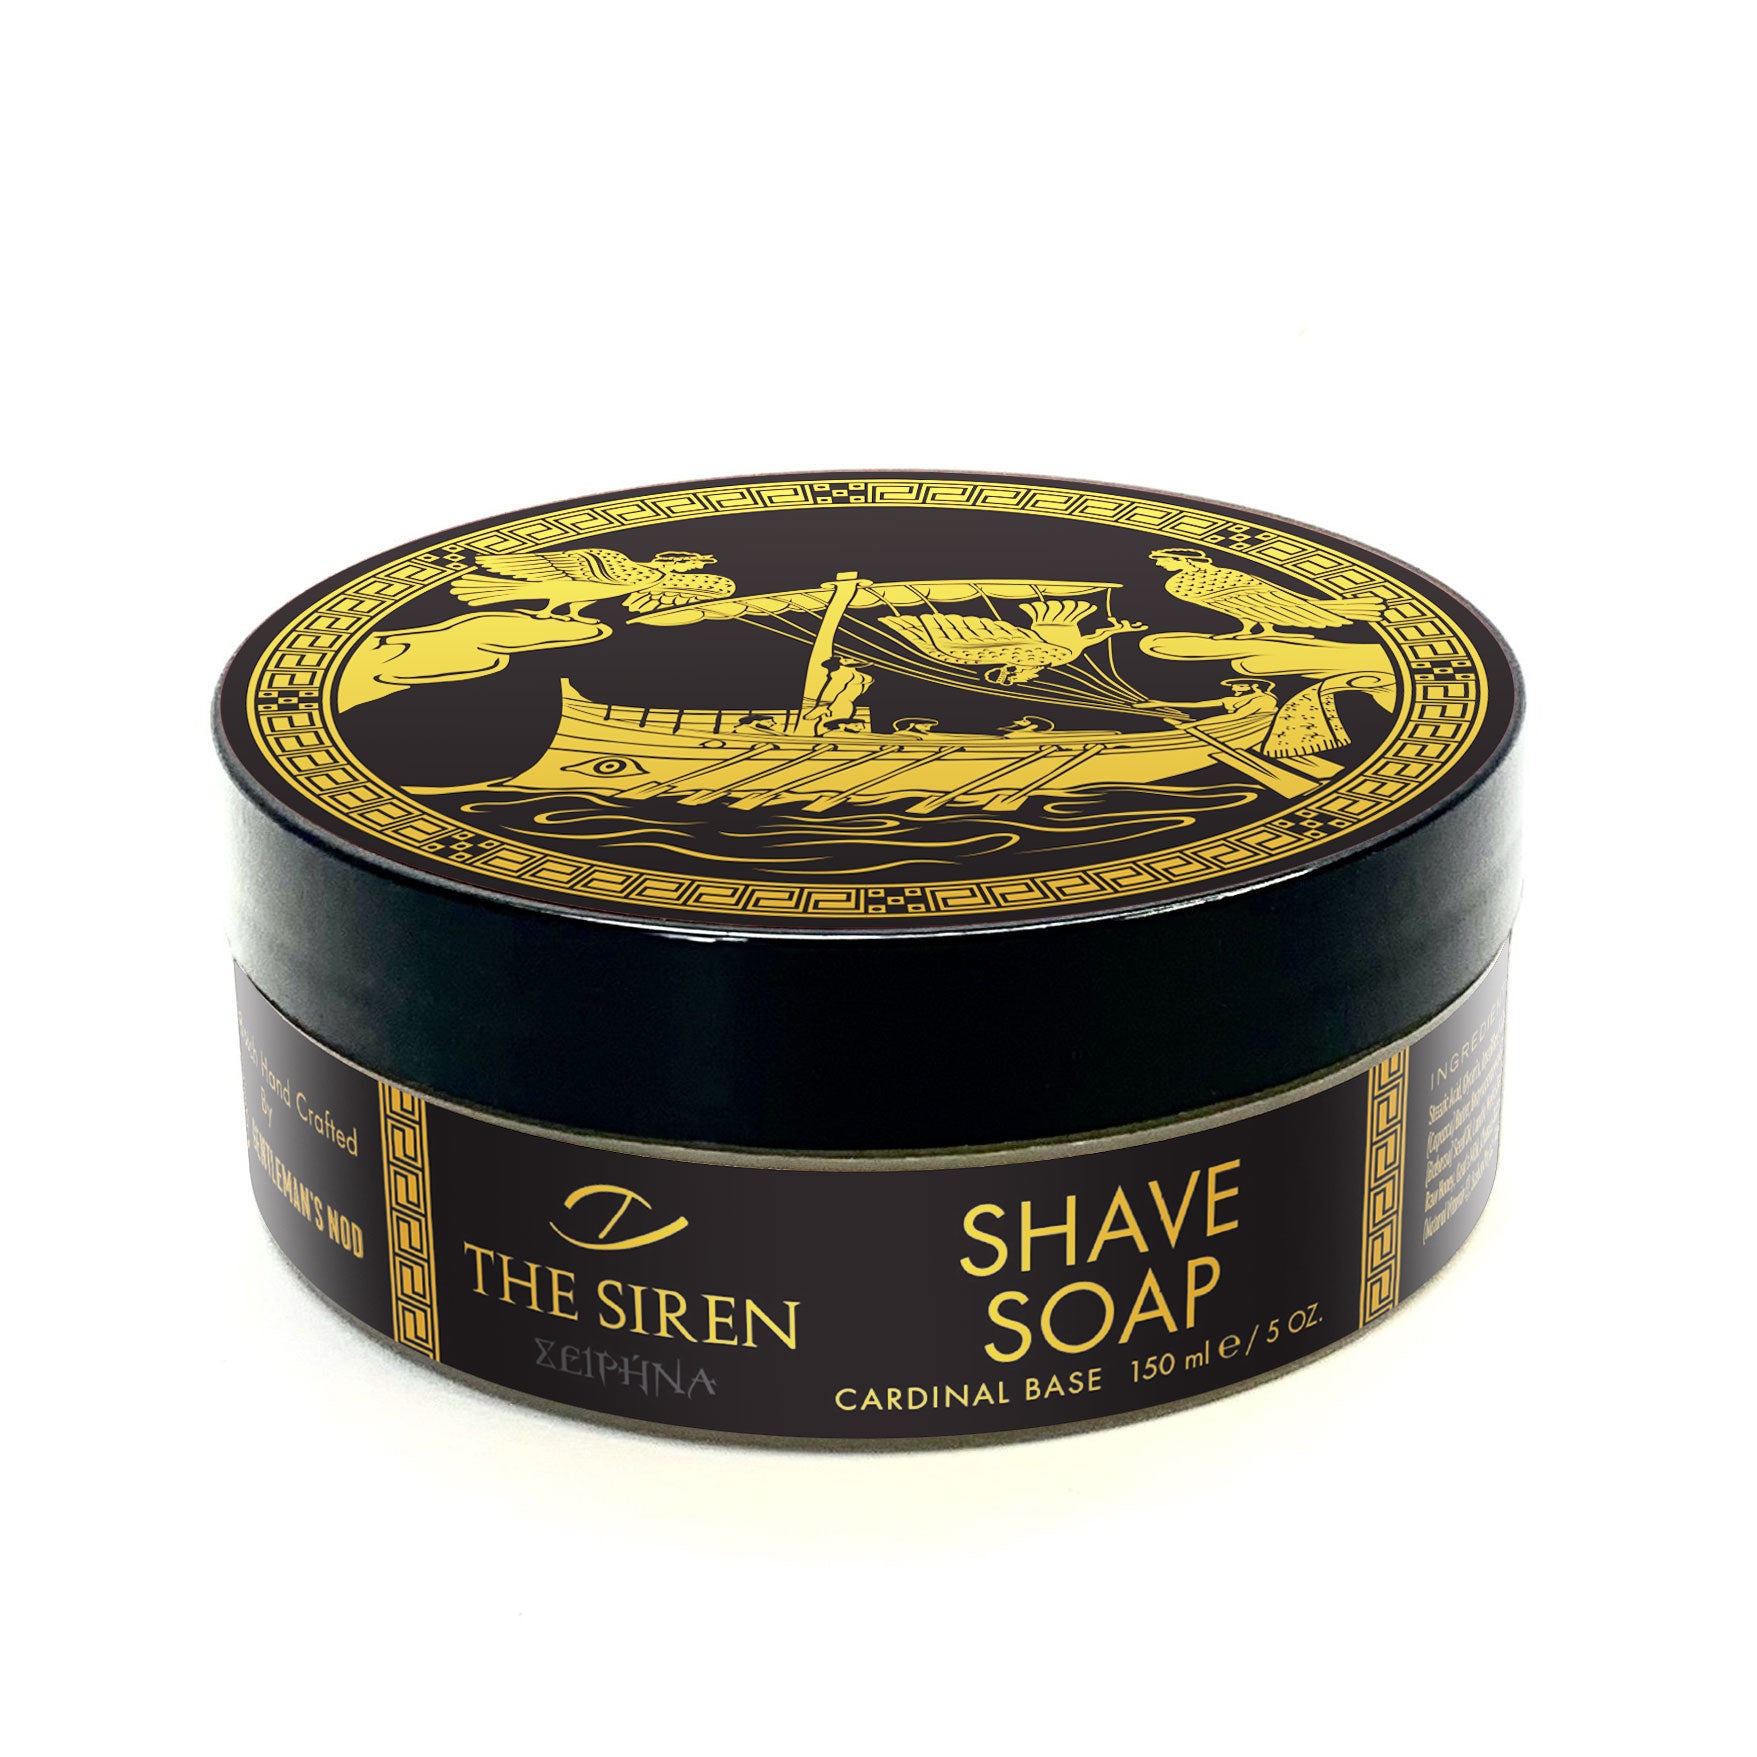 Curly Scents x Zaharoff THE SIREN Shave Soap